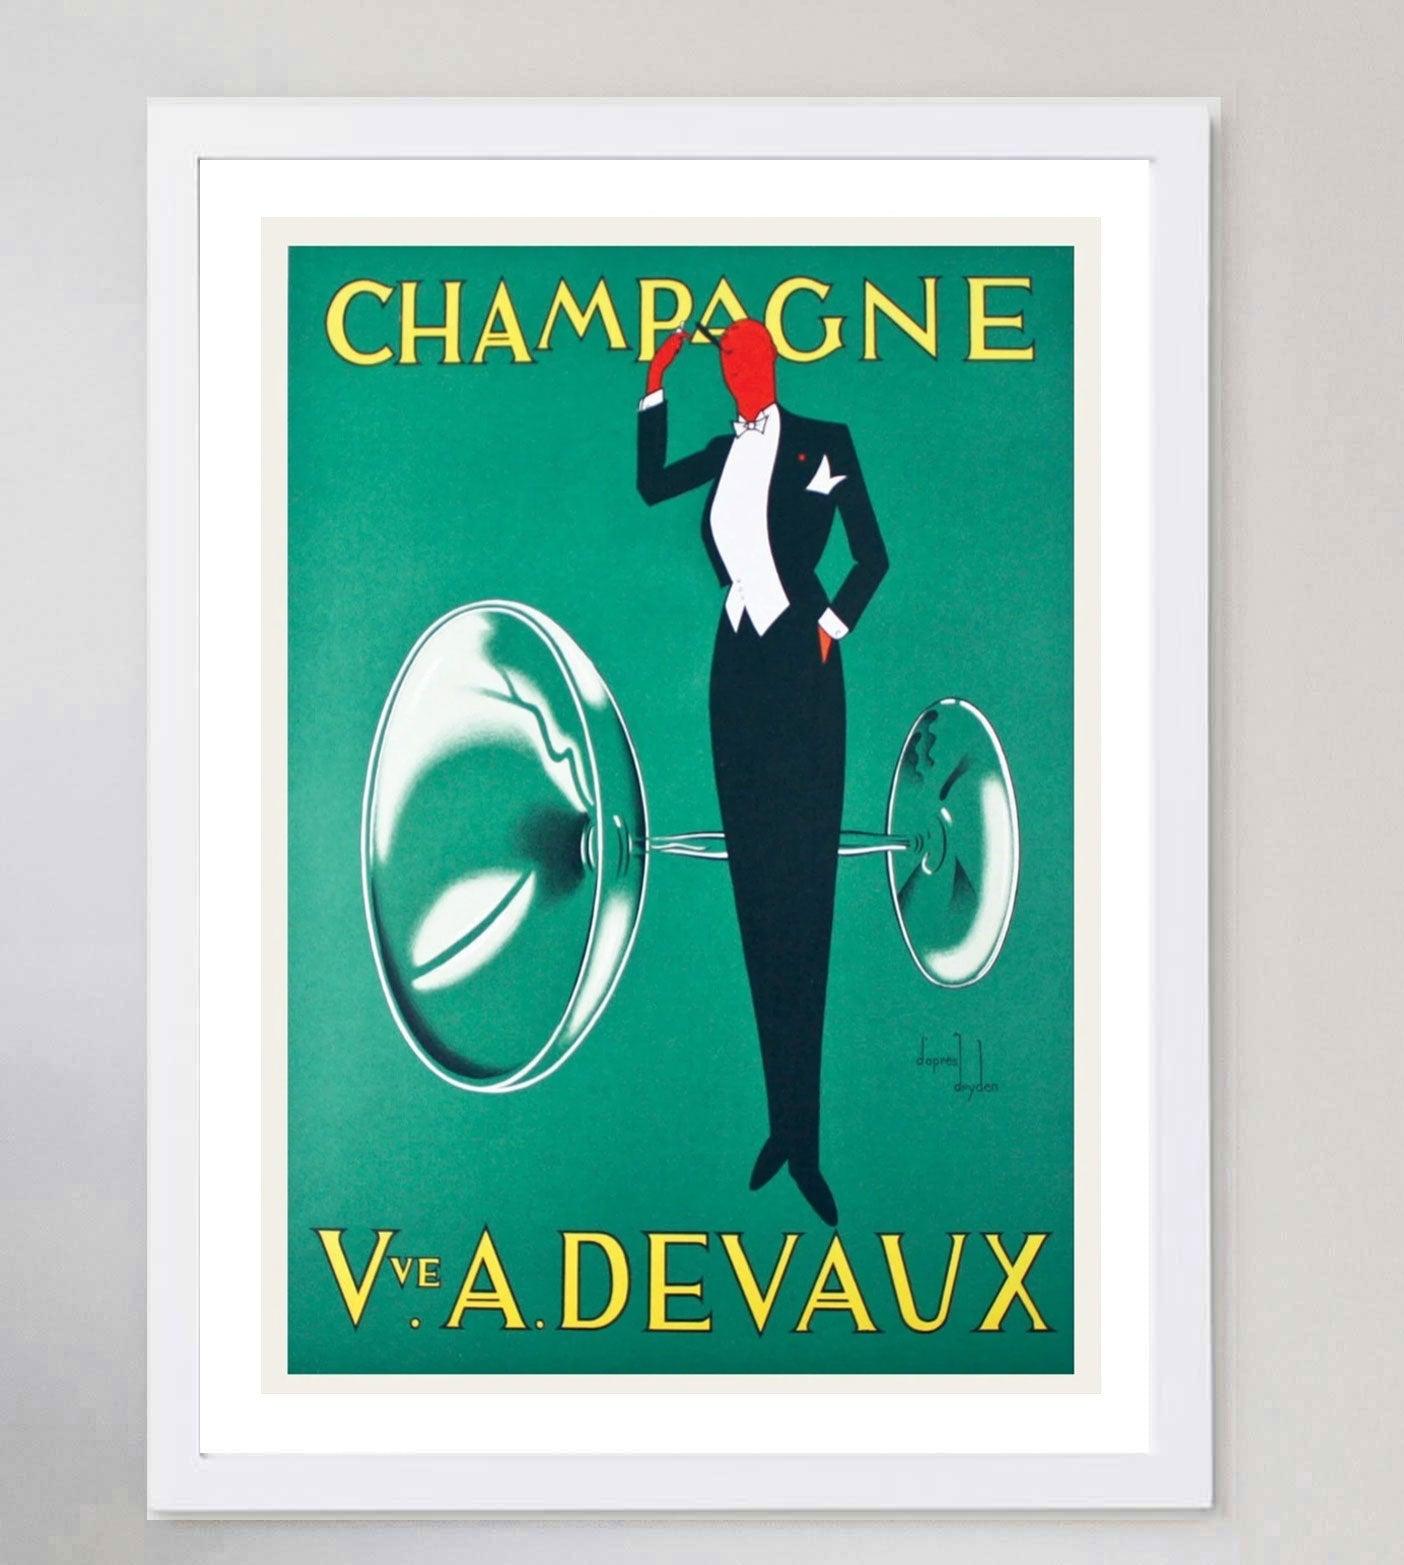 1935 Champagne Devaux Original Vintage Poster In Good Condition For Sale In Winchester, GB